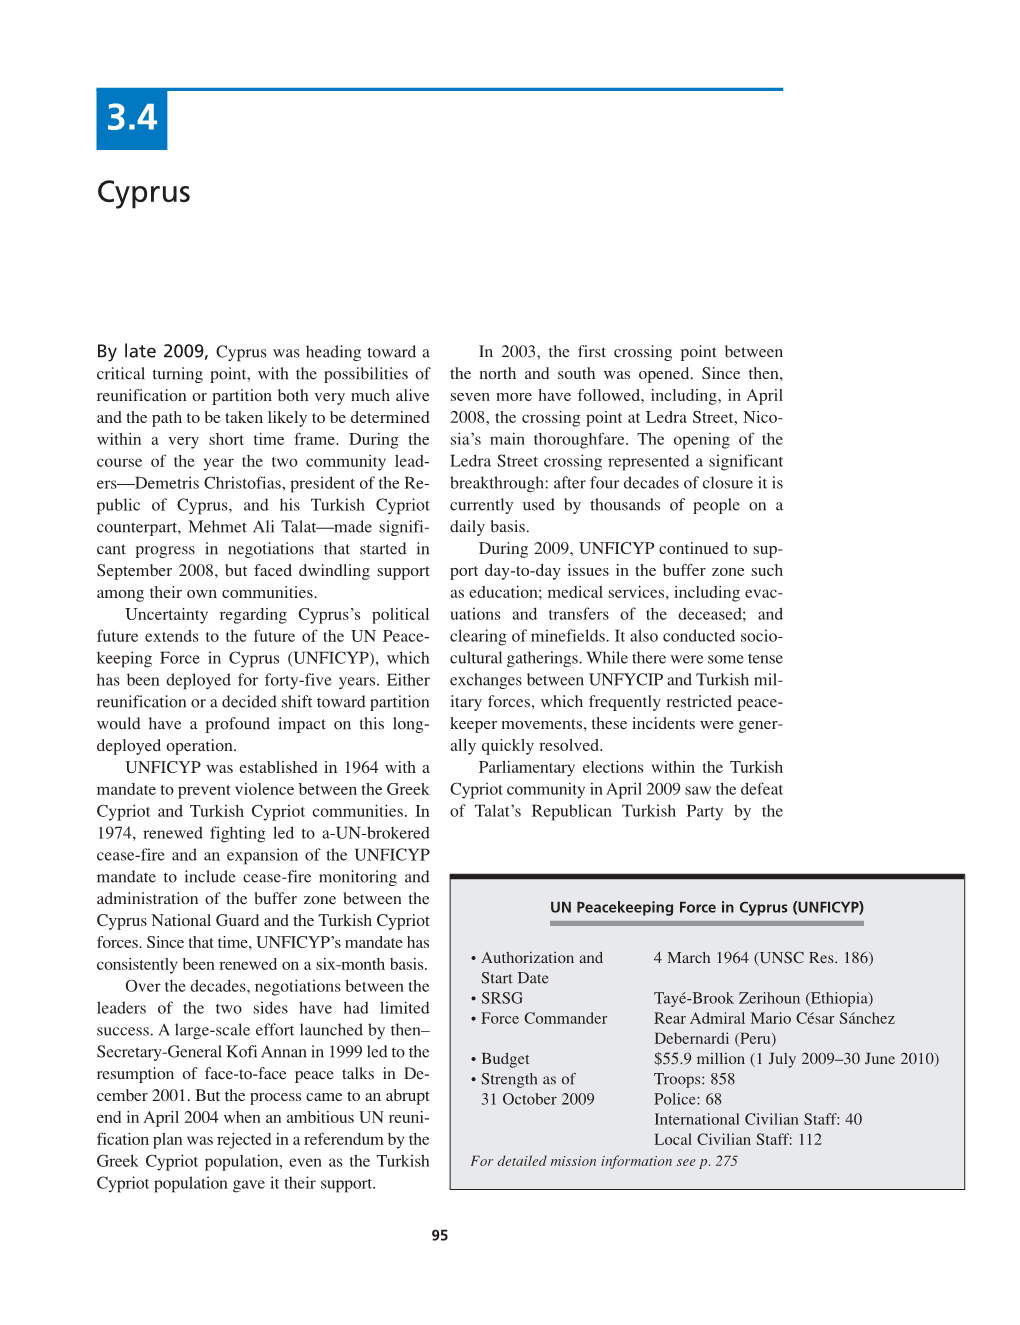 Cyprus Mission Notes